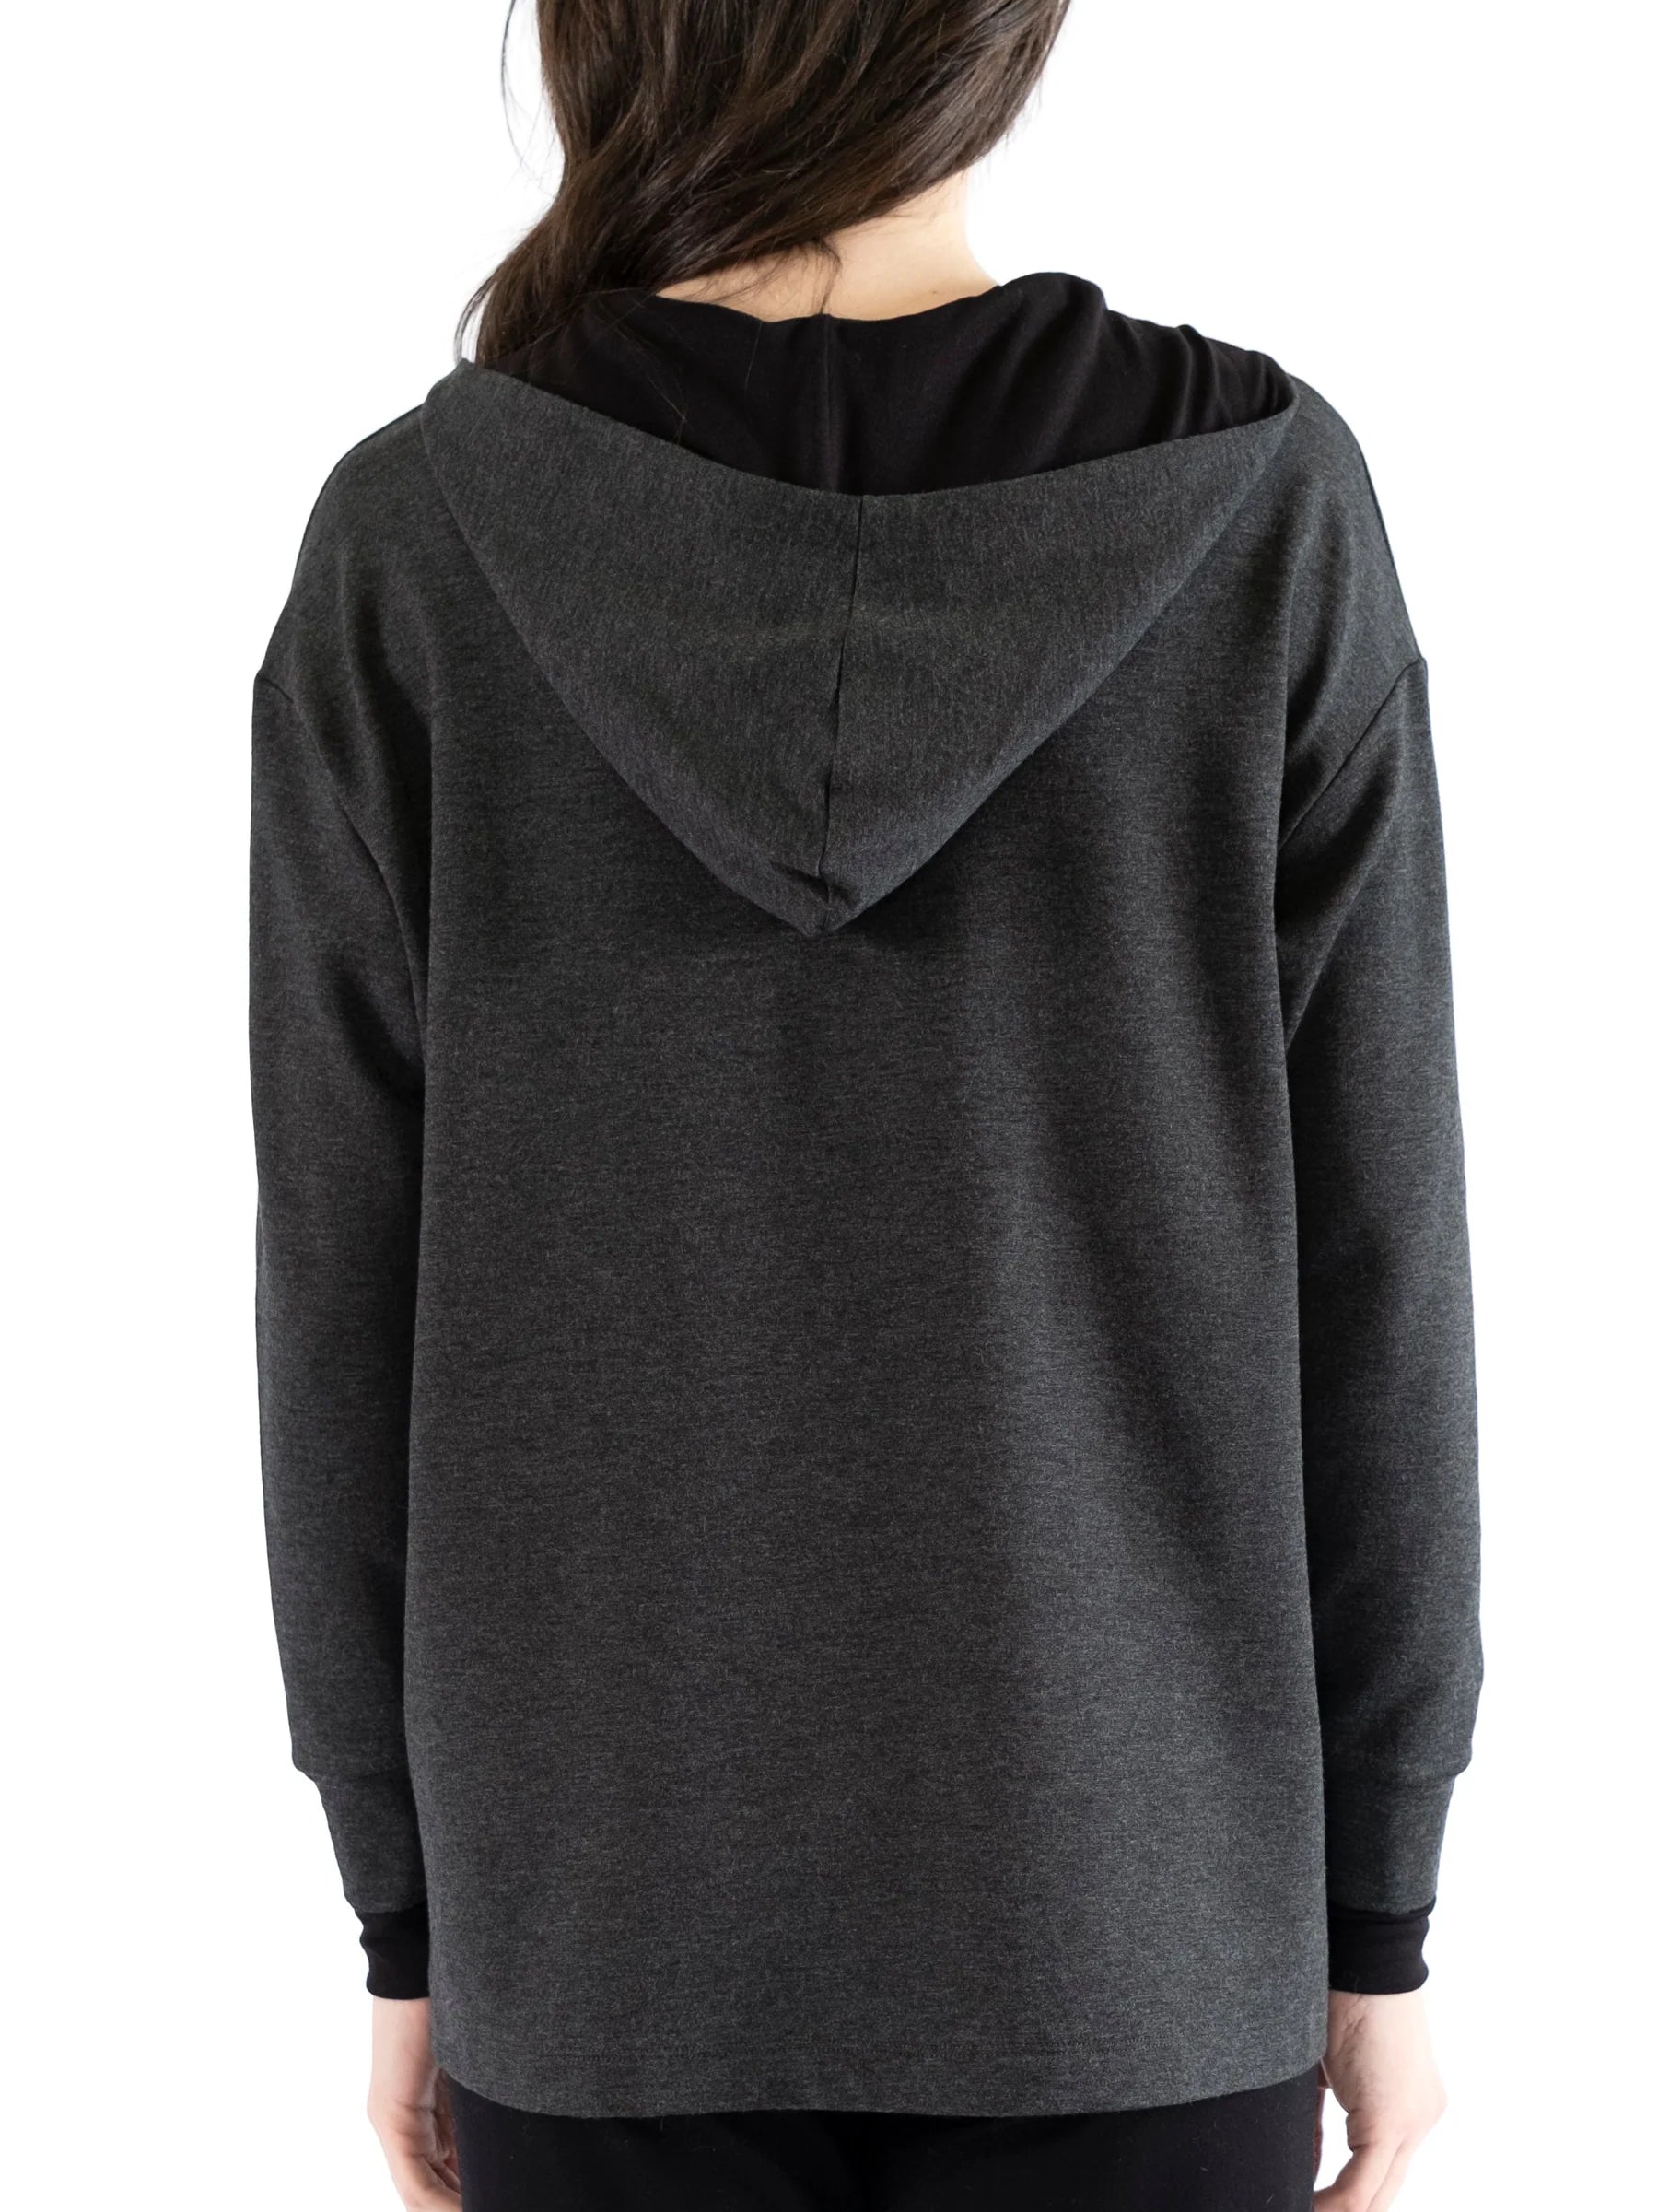 Capote Emma Hooded Tunic in Charcoal